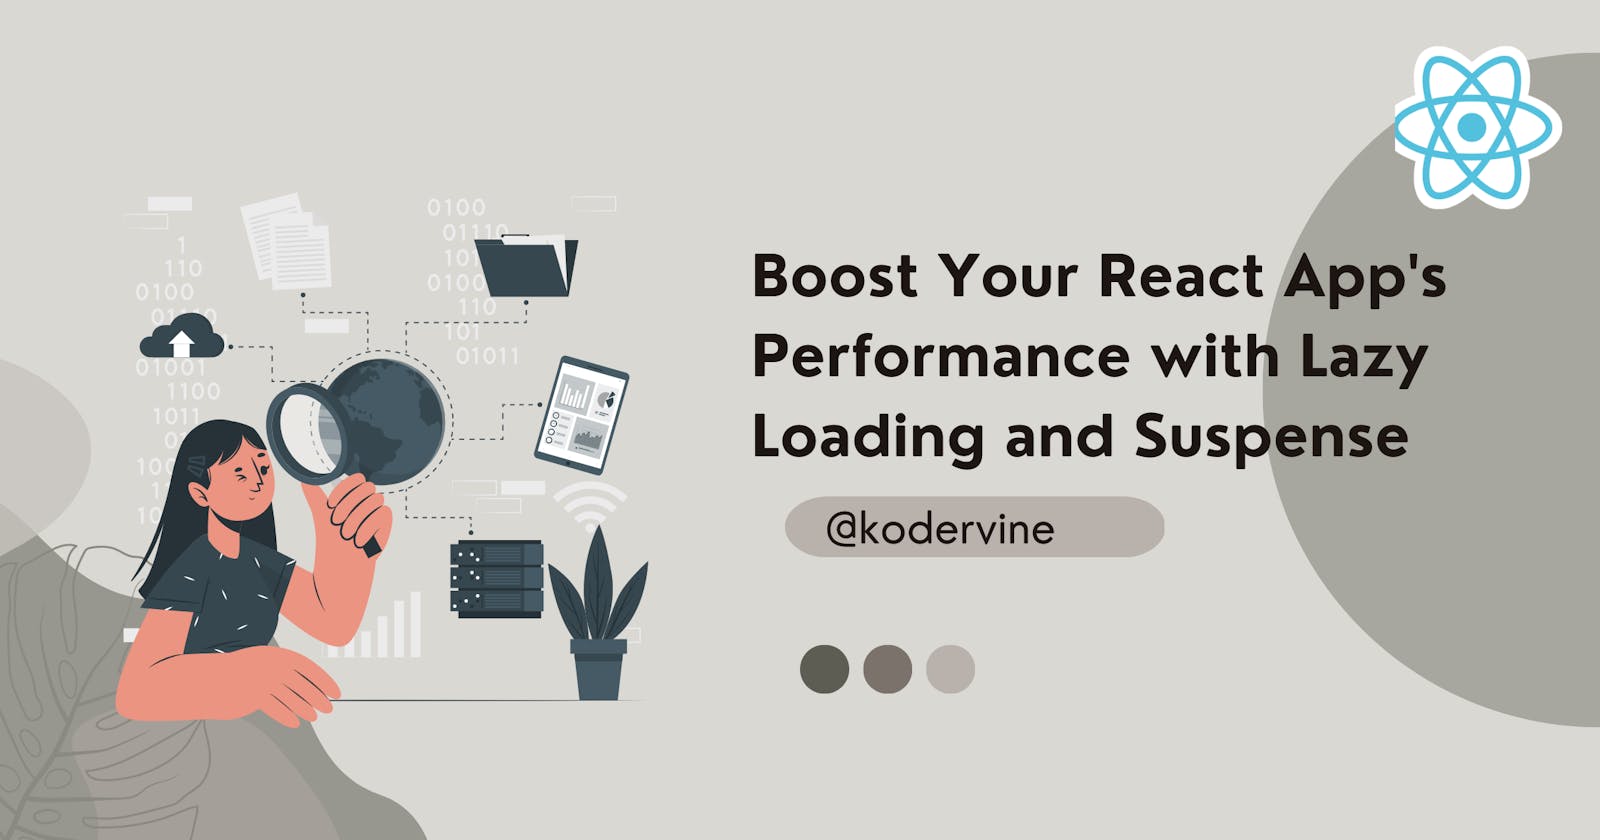 Boost Your React App's Performance with Lazy Loading and Suspense